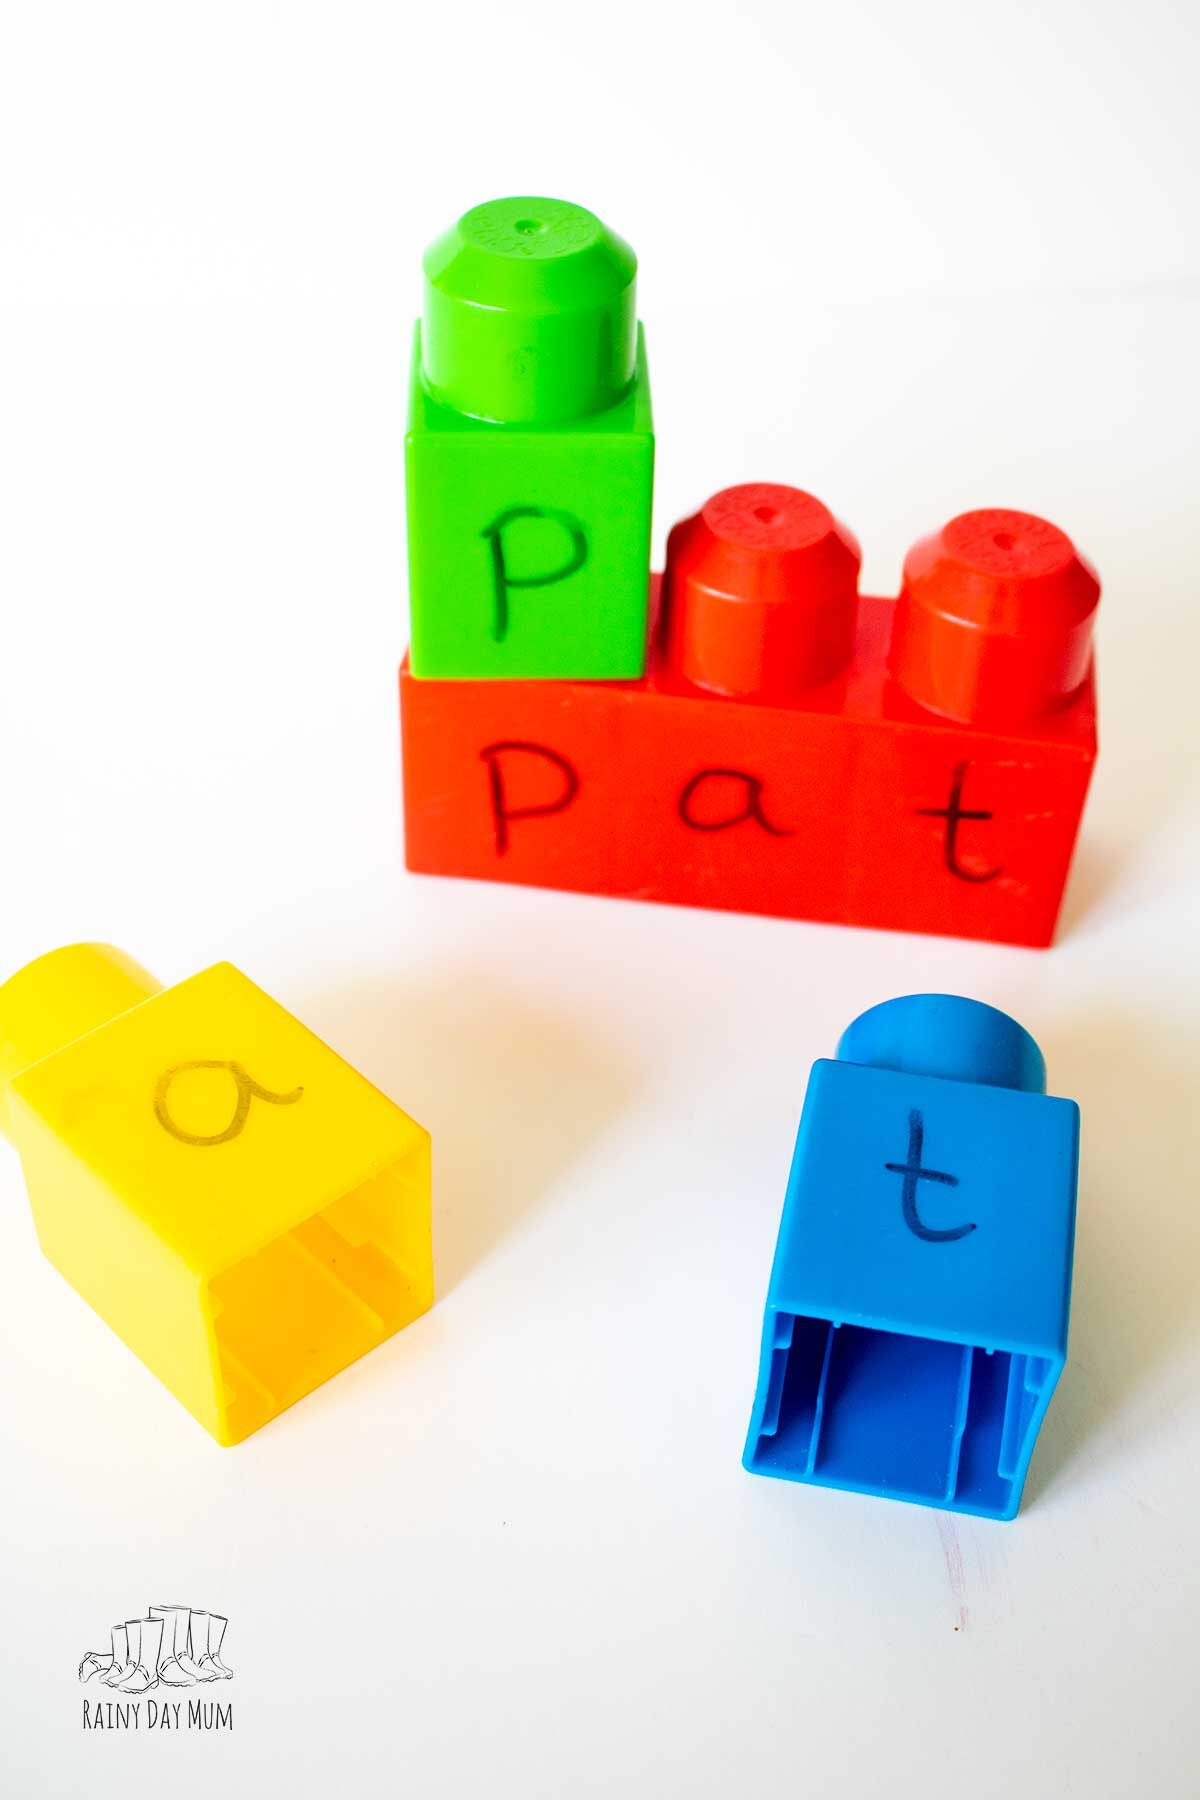 Building a word using mega blocks, the word on the 3 block is pat and single blocks are scattered around with the letters p a and t on to make the word.